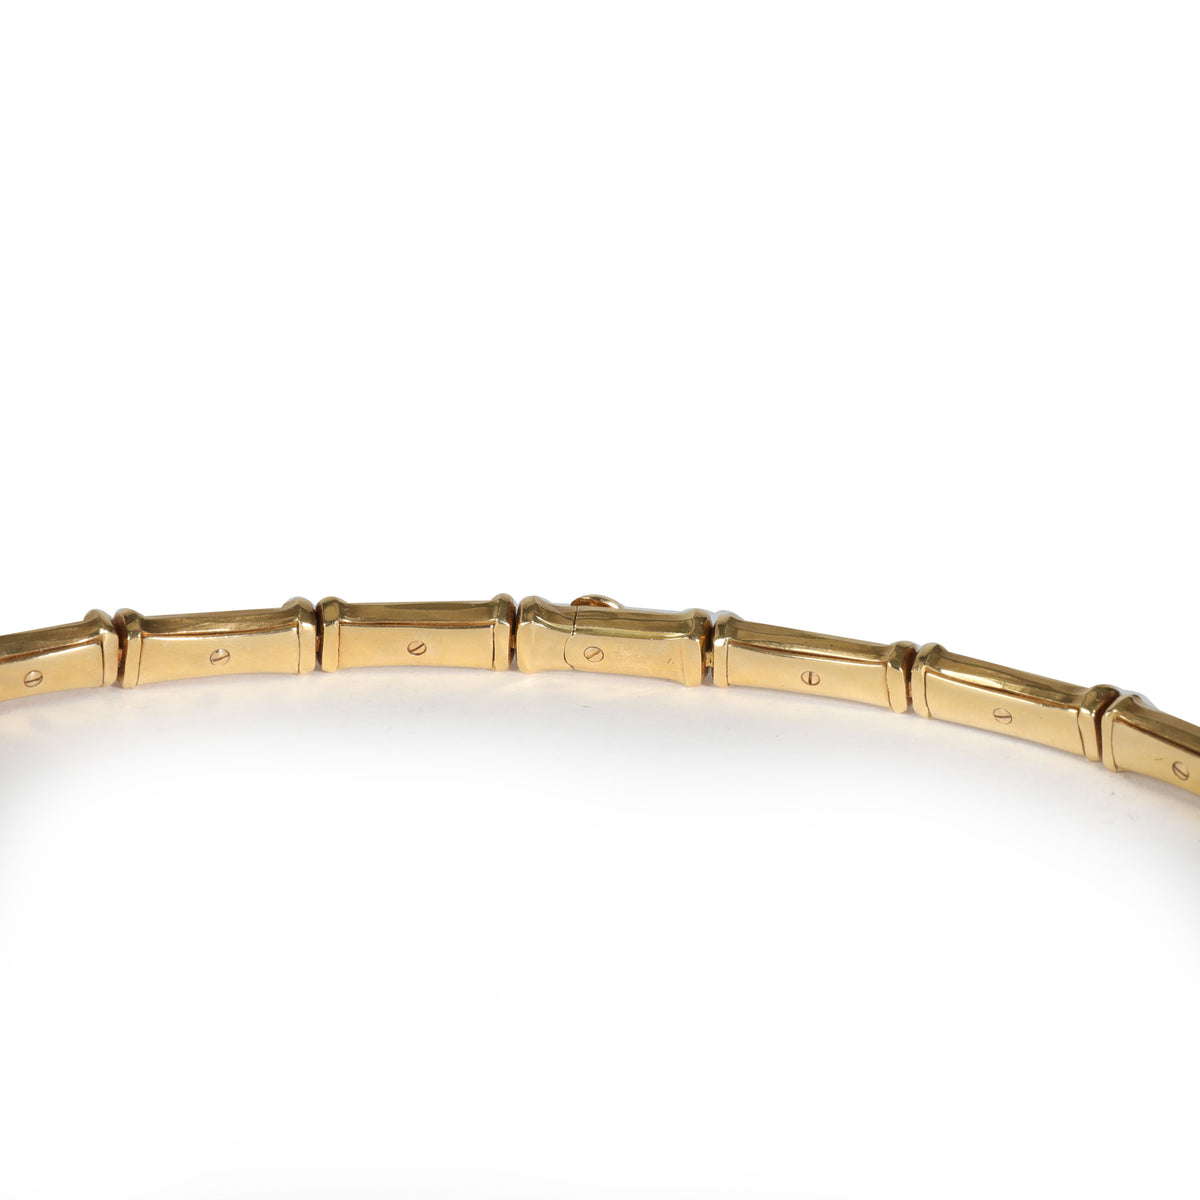 Cartier Bamboo Necklace in 18K Yellow Gold